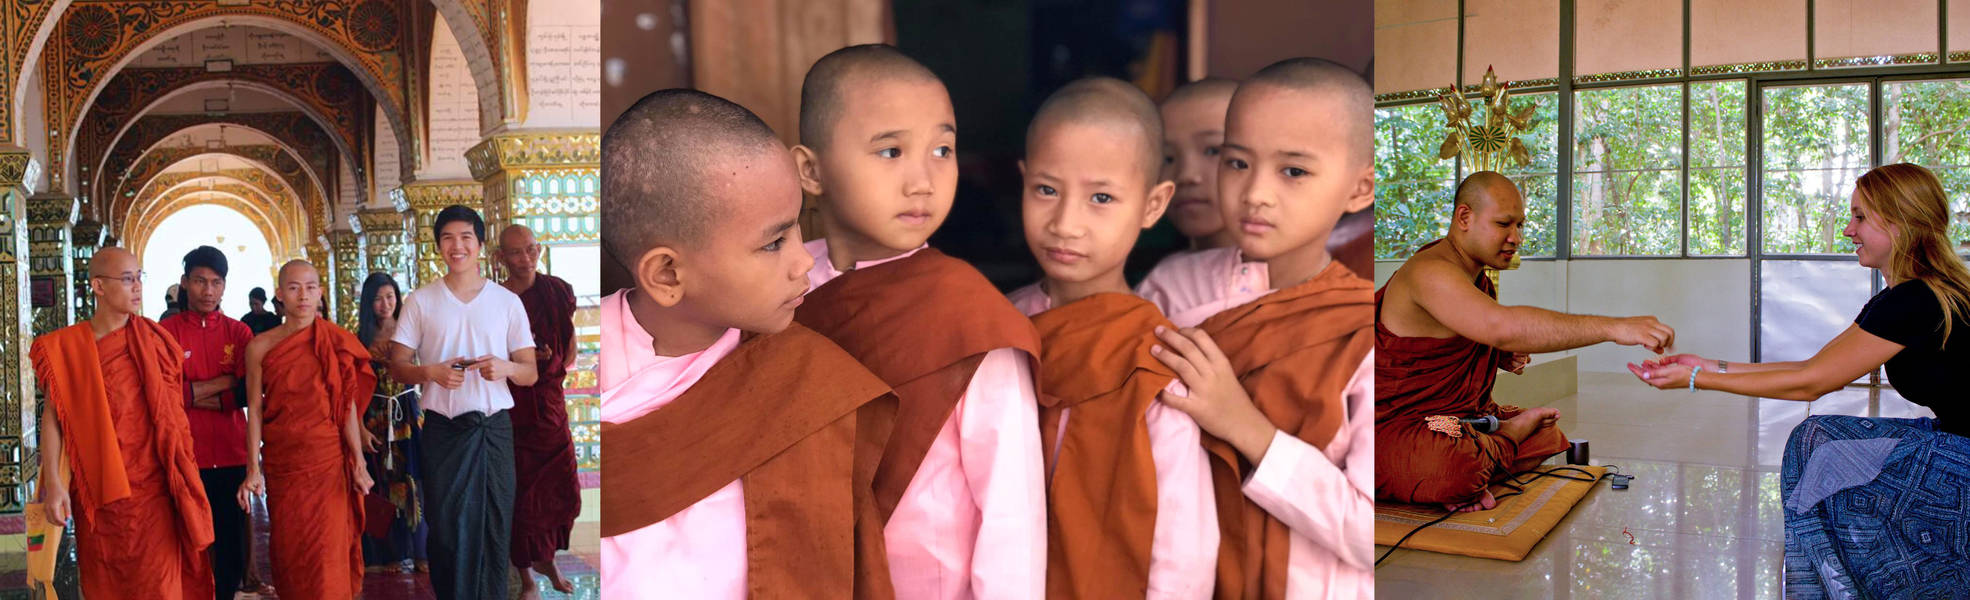 English lessons for monks in Thailand